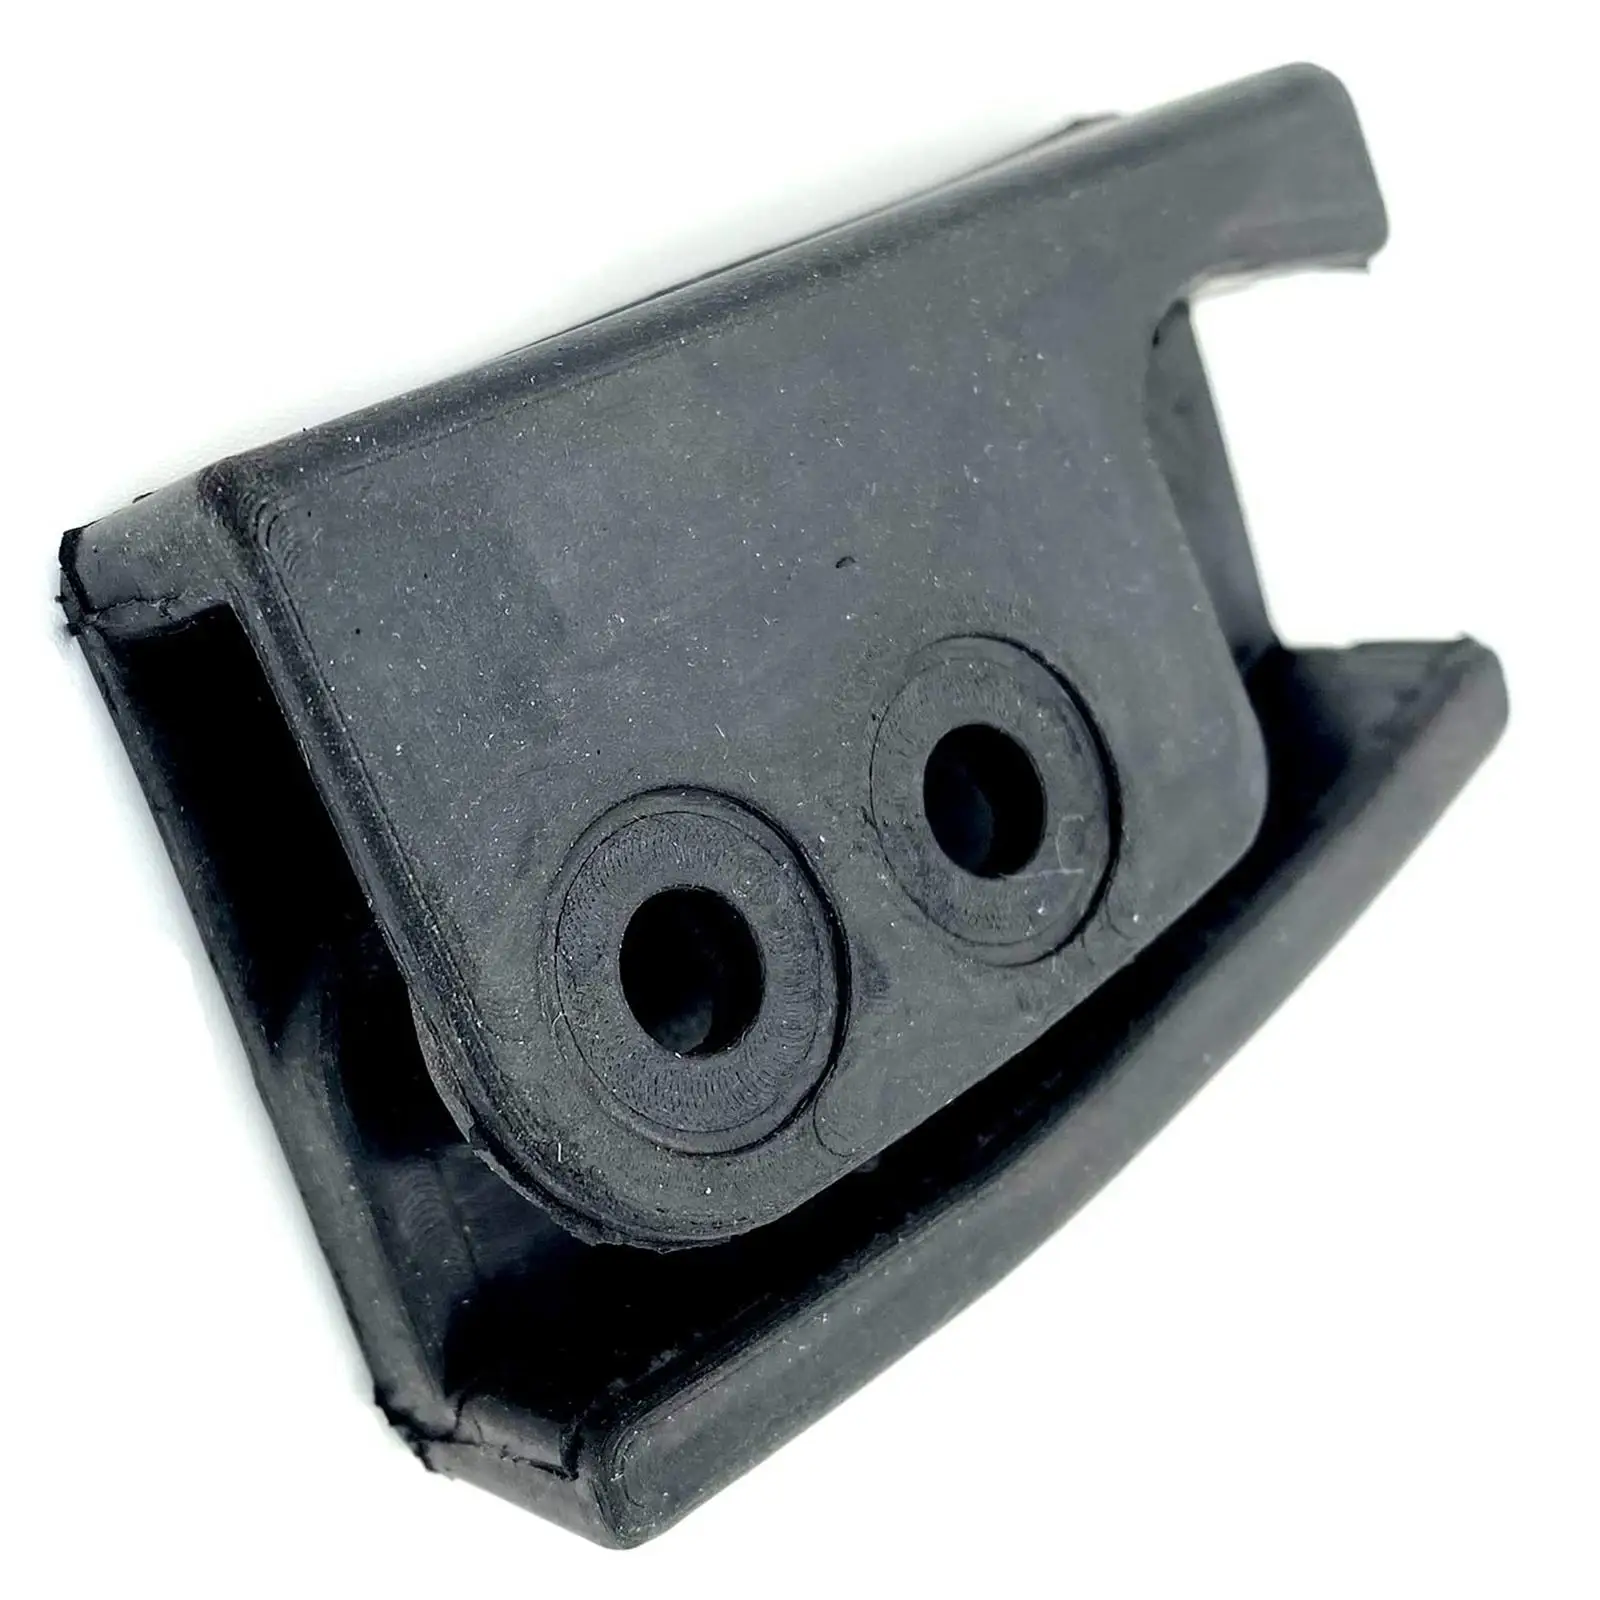 Side Kickstand Rubber Pad 5412662 Replaces Spare Parts Fit for Victory Durable High Performance